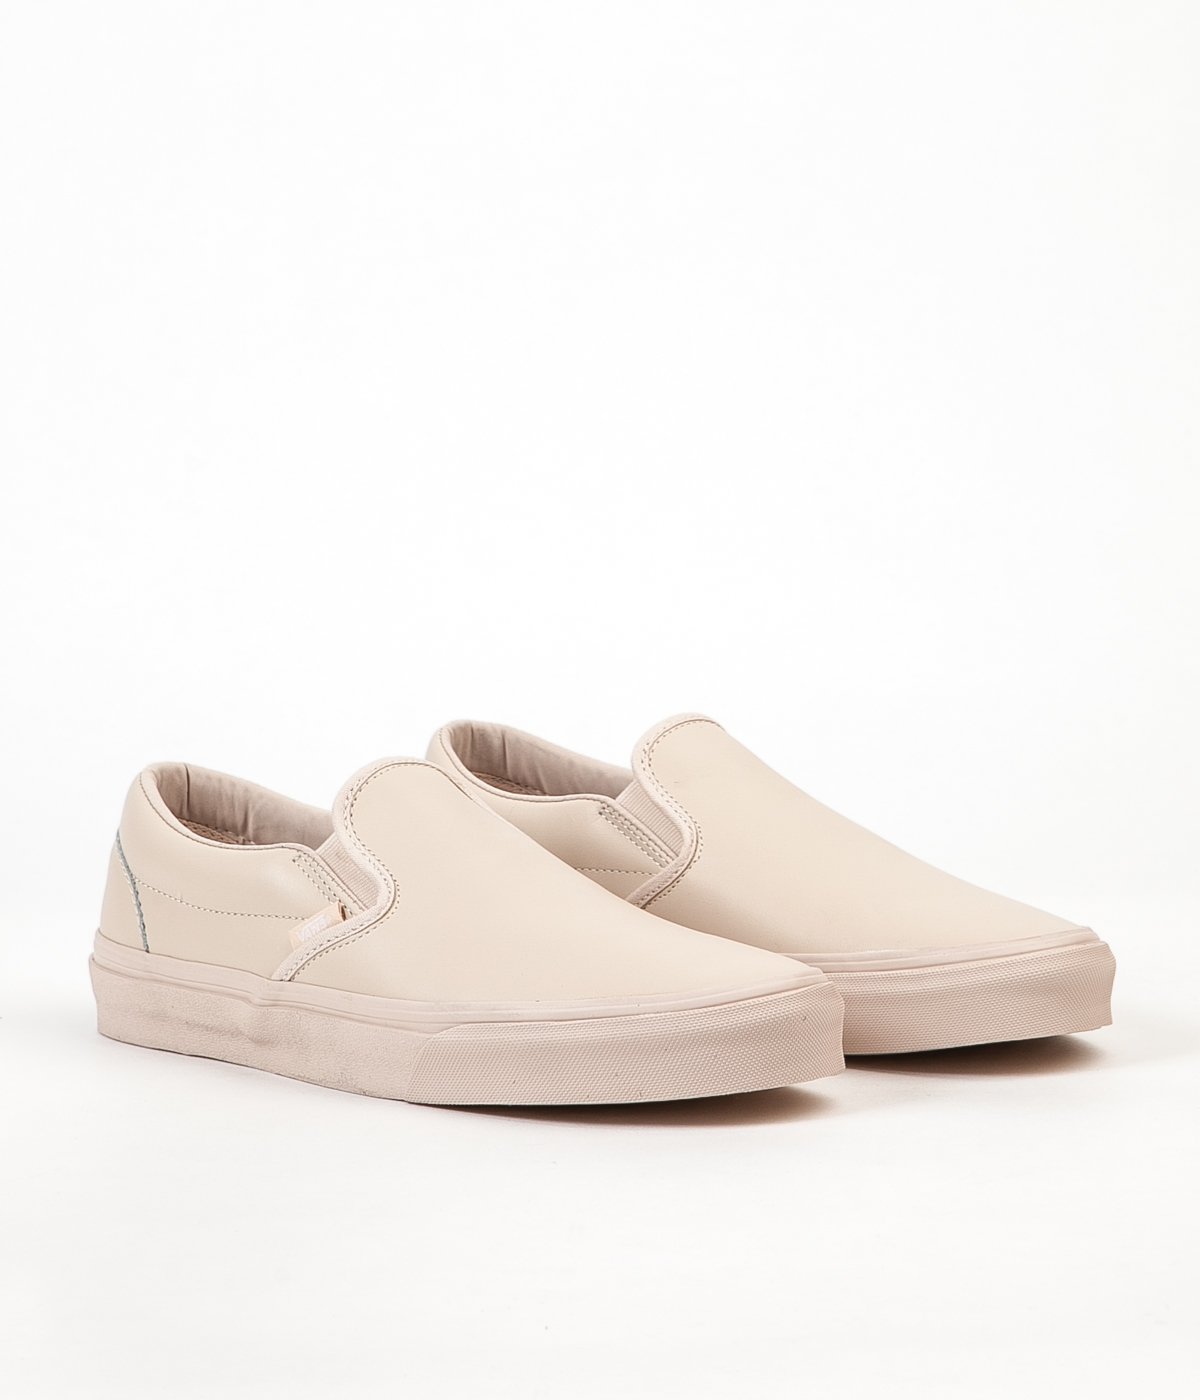 Vans Classic Slip On Leather Shoes - Whisper Pink / Mono | Always in Colour